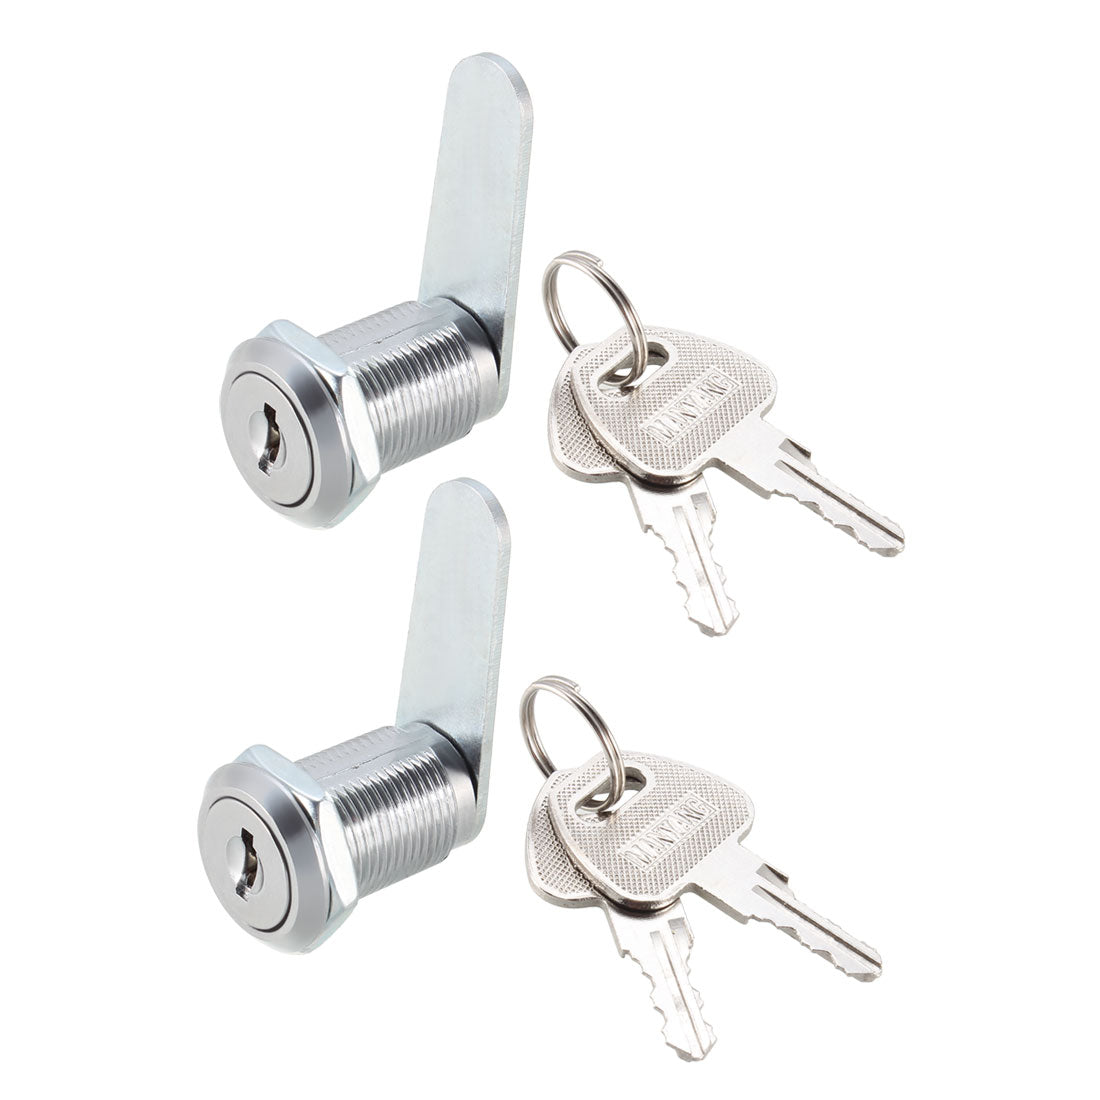 uxcell Uxcell Cam Locks 25mm Cylinder Length Fits Max 5/8-inch Thick Panel Keyed Alike 2Pcs